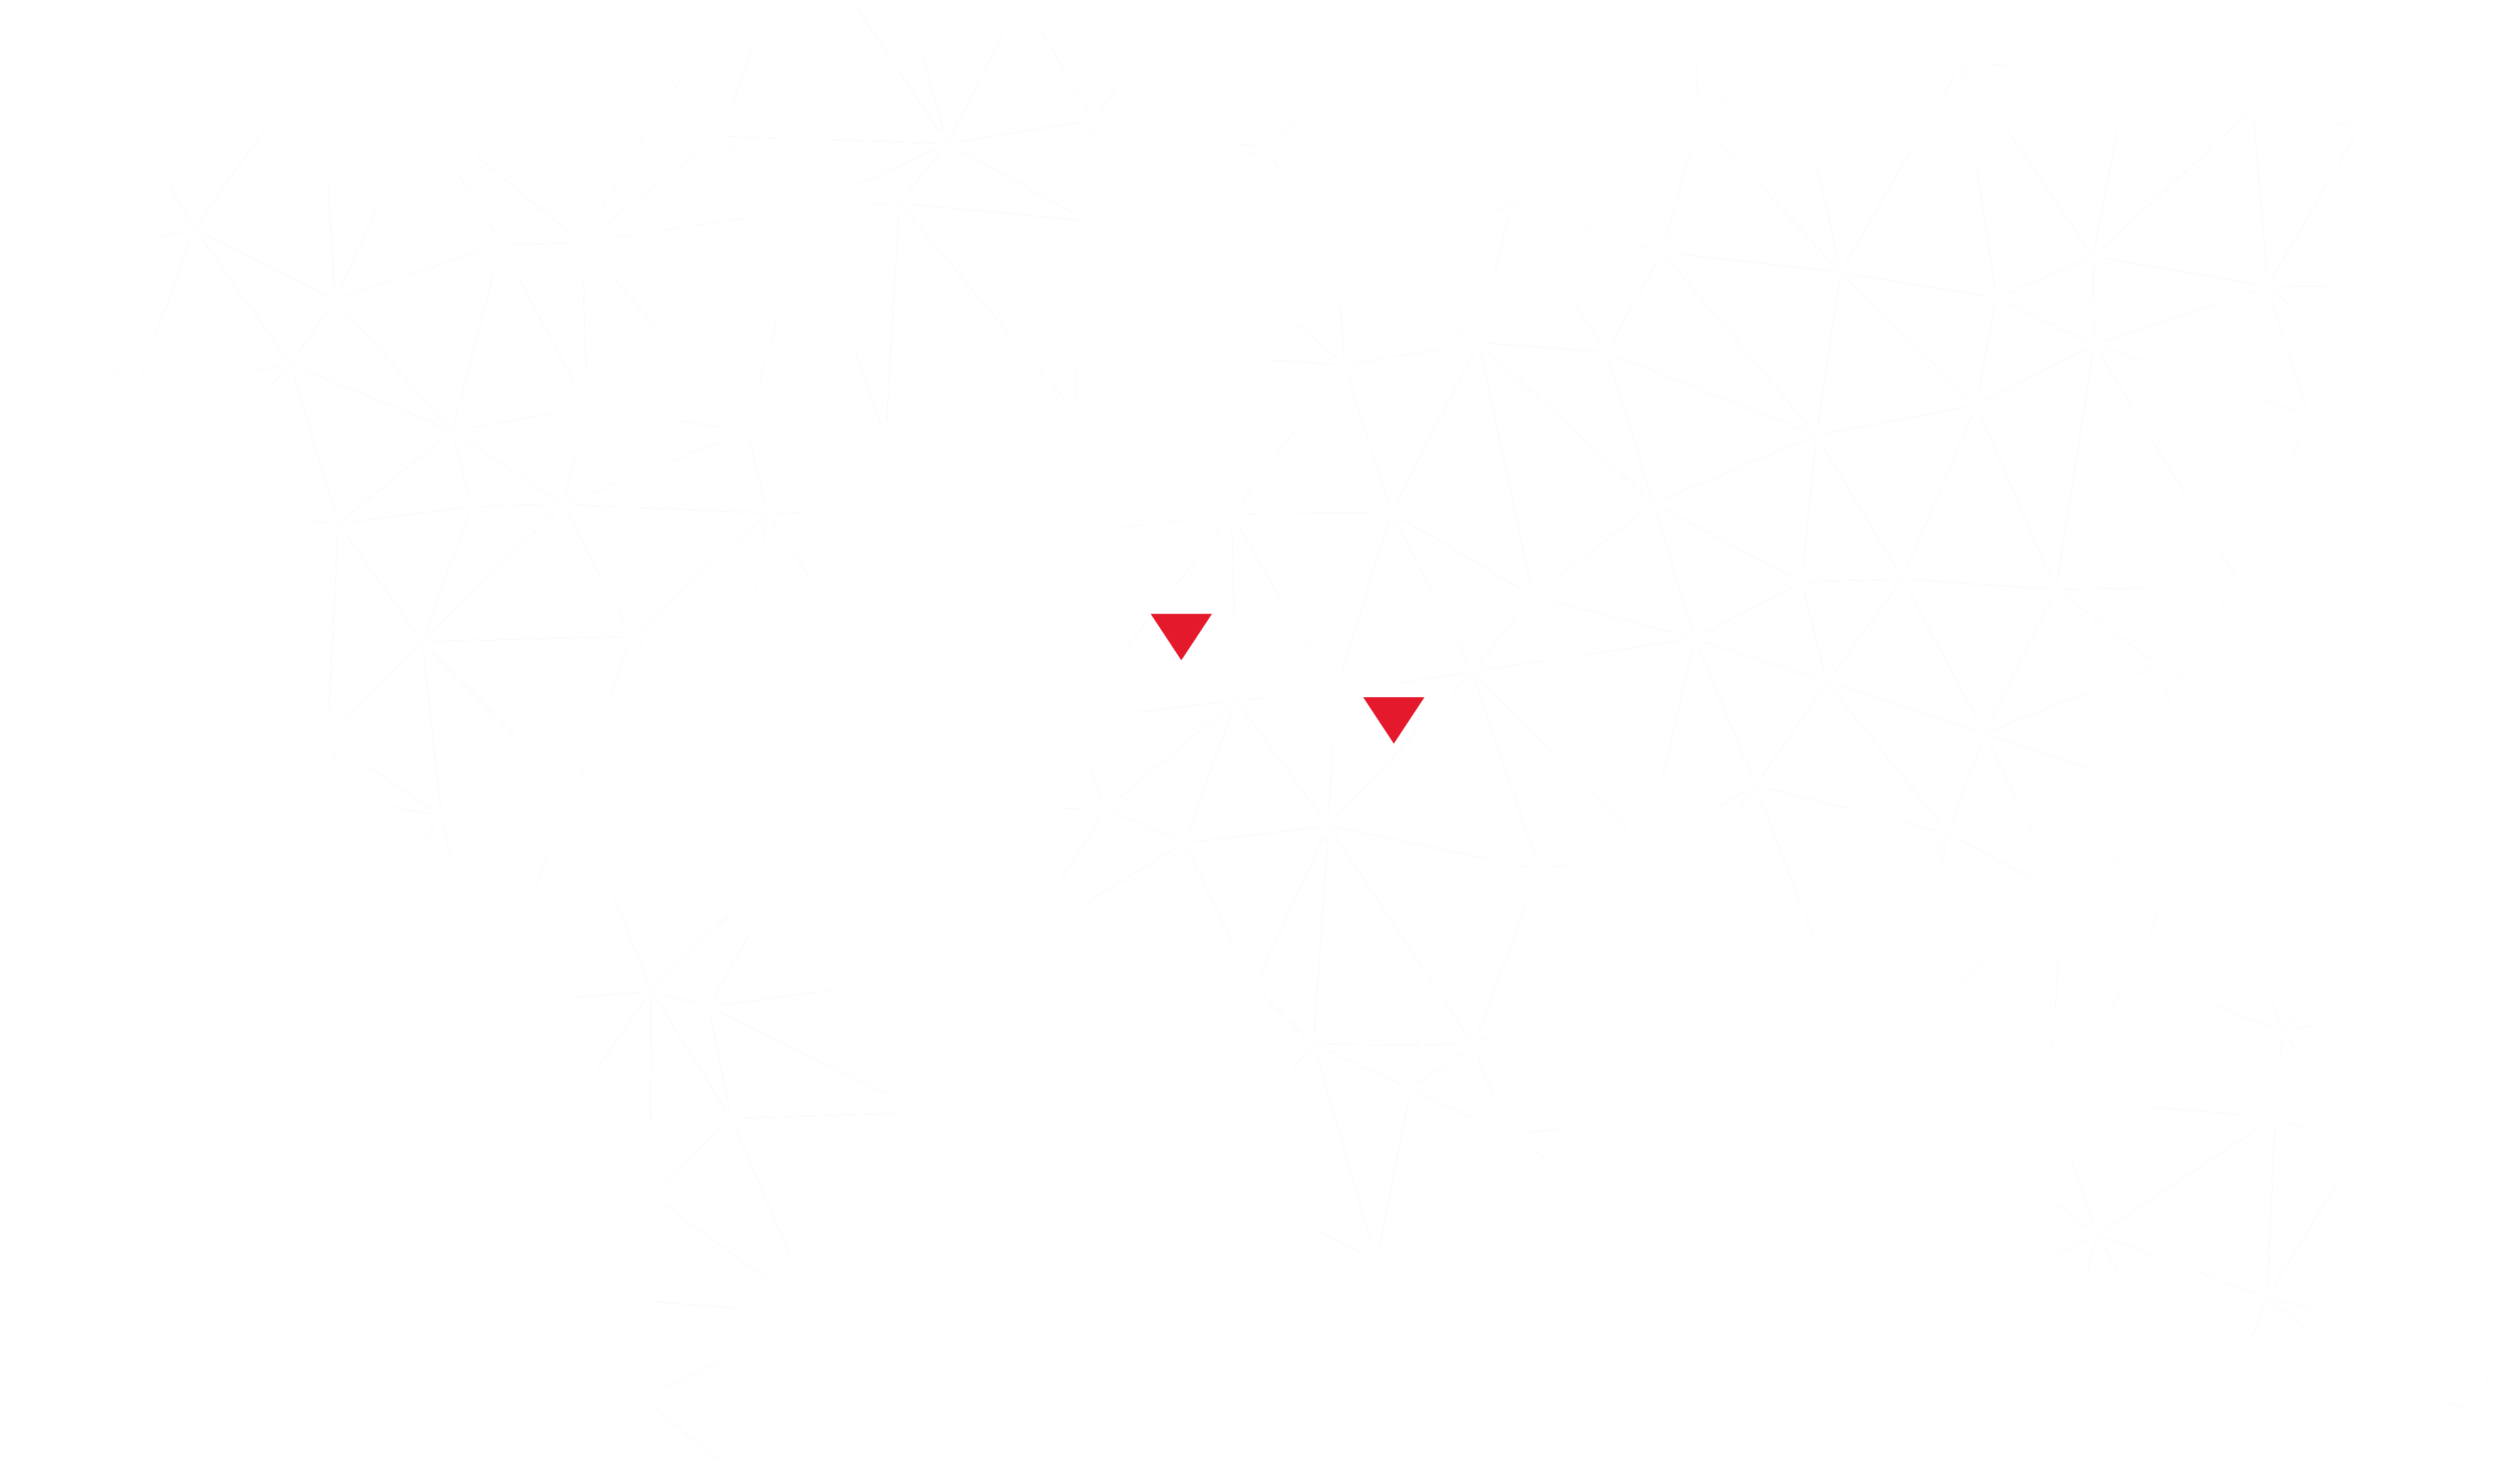 https://naos-solutions.com/wp-content/uploads/2022/09/map-of-the-world-01.png